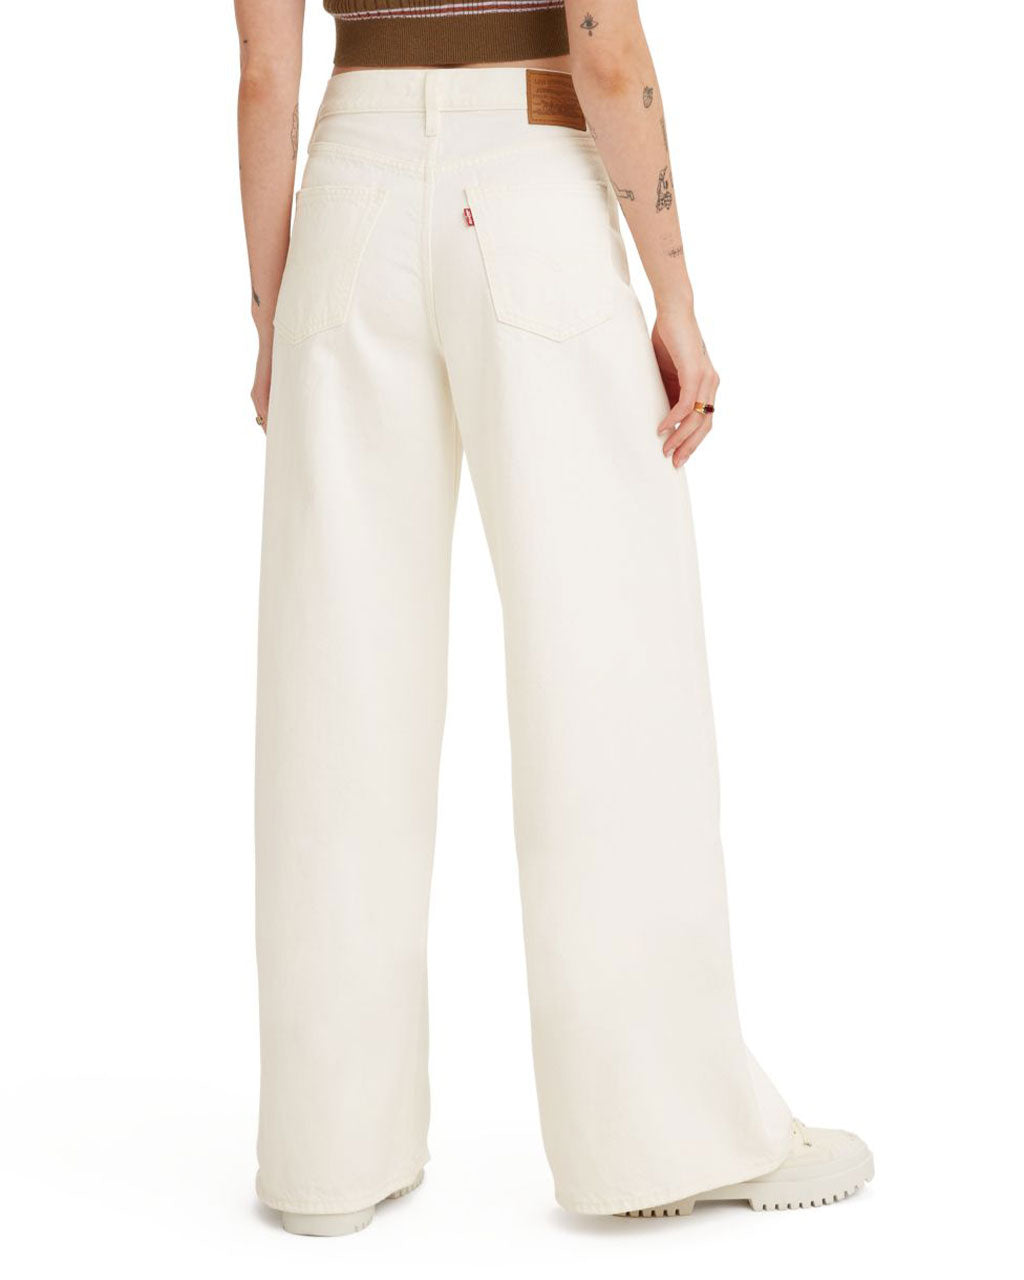 XL Flood Jeans - White Rinse by Levi's - jeans 